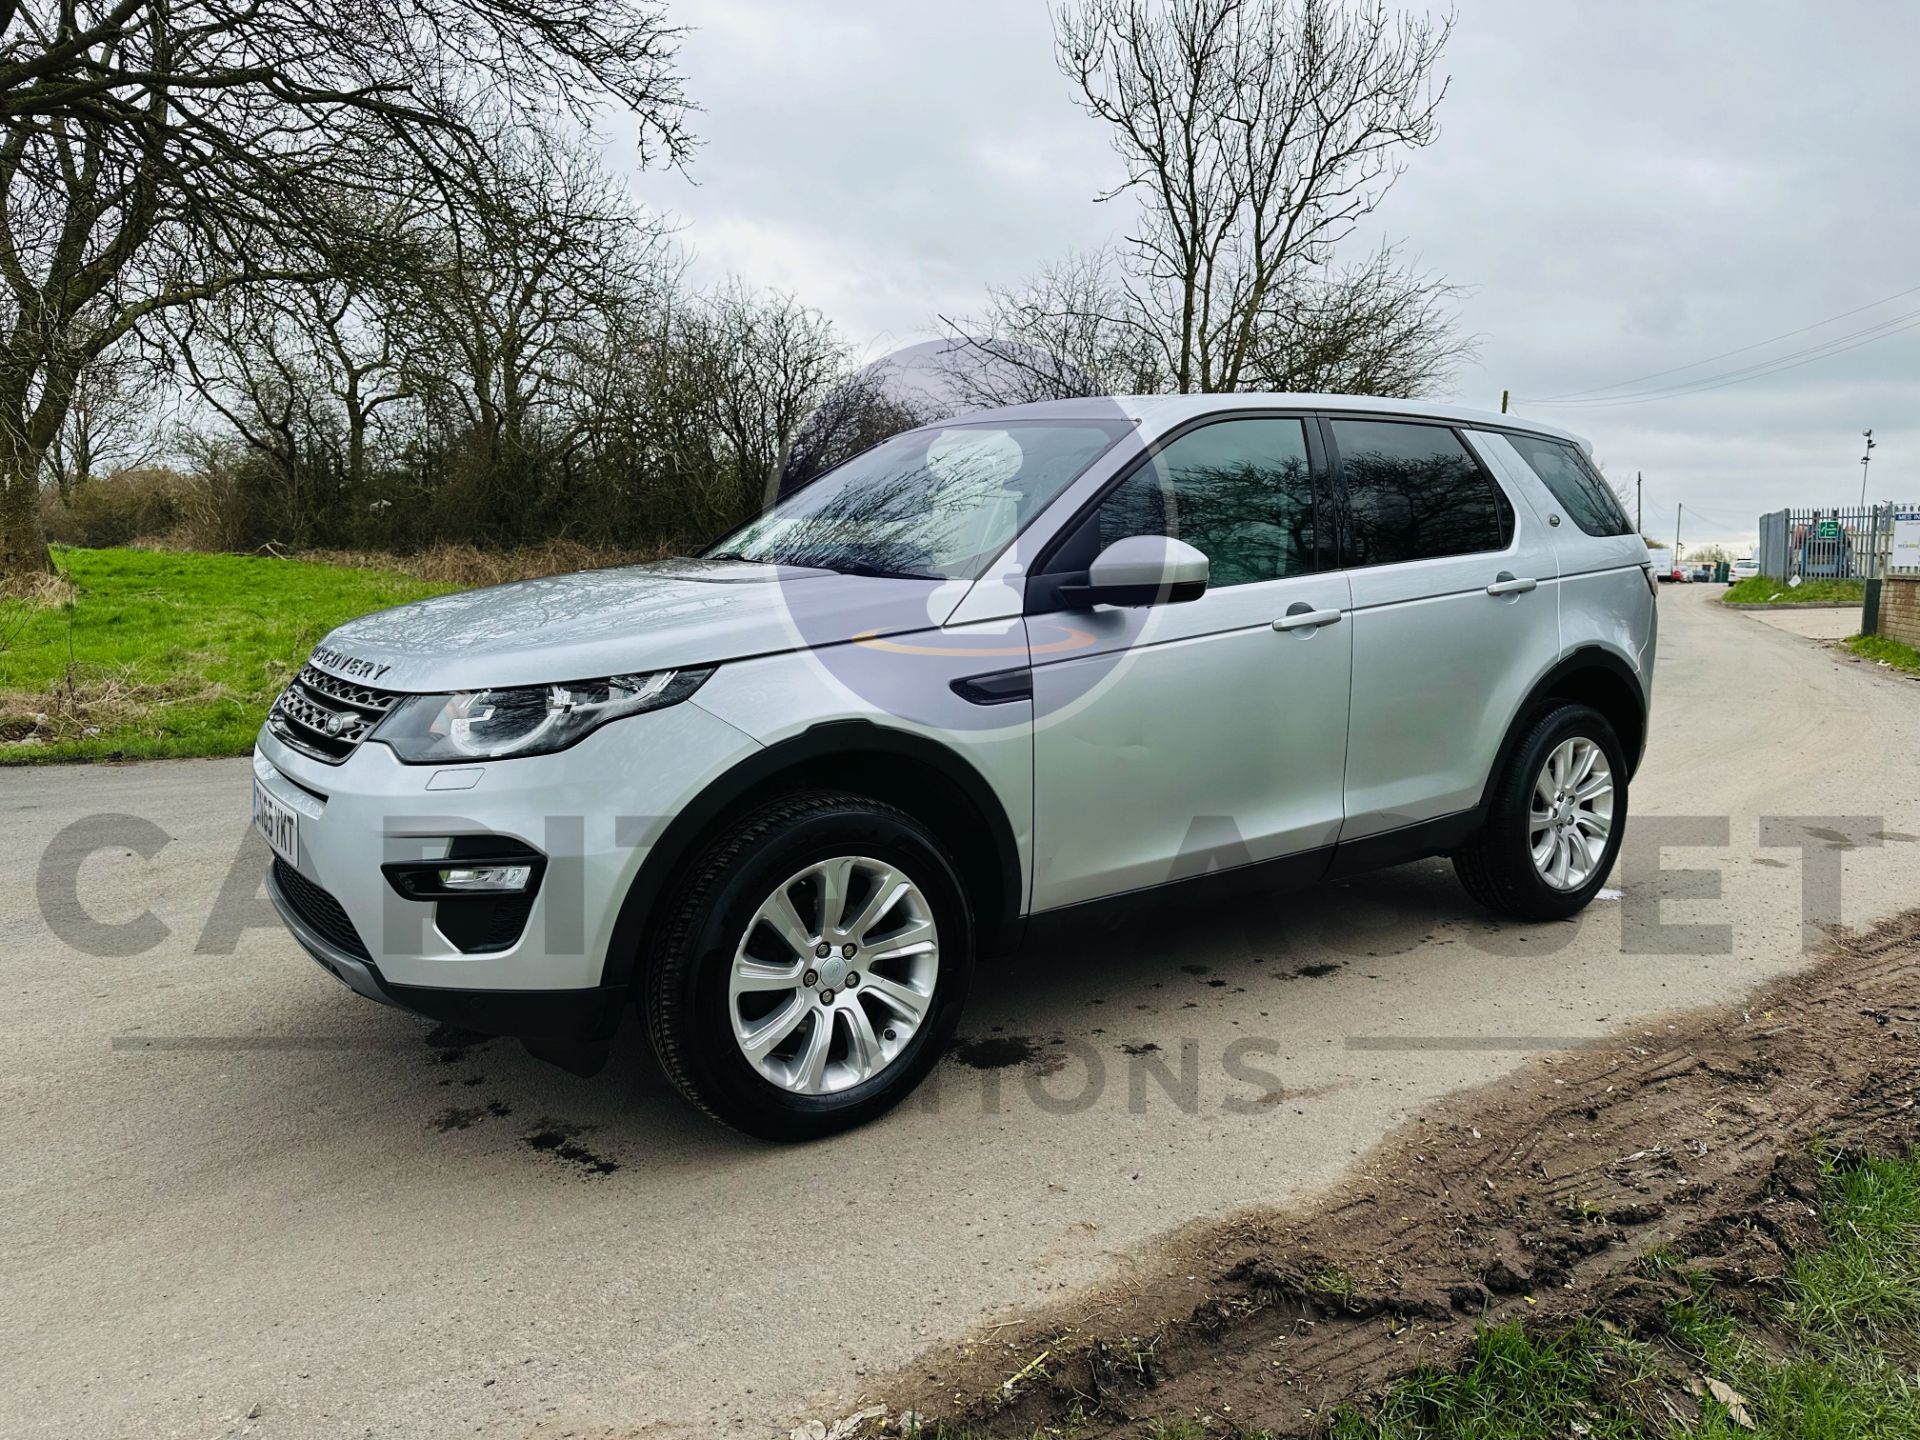 LAND ROVER DISCOVERY SPORT *SE TECH* 7 SEATER SUV (65 REG - EURO 6) 2.0 TD4 - AUTOMATIC - Image 5 of 38